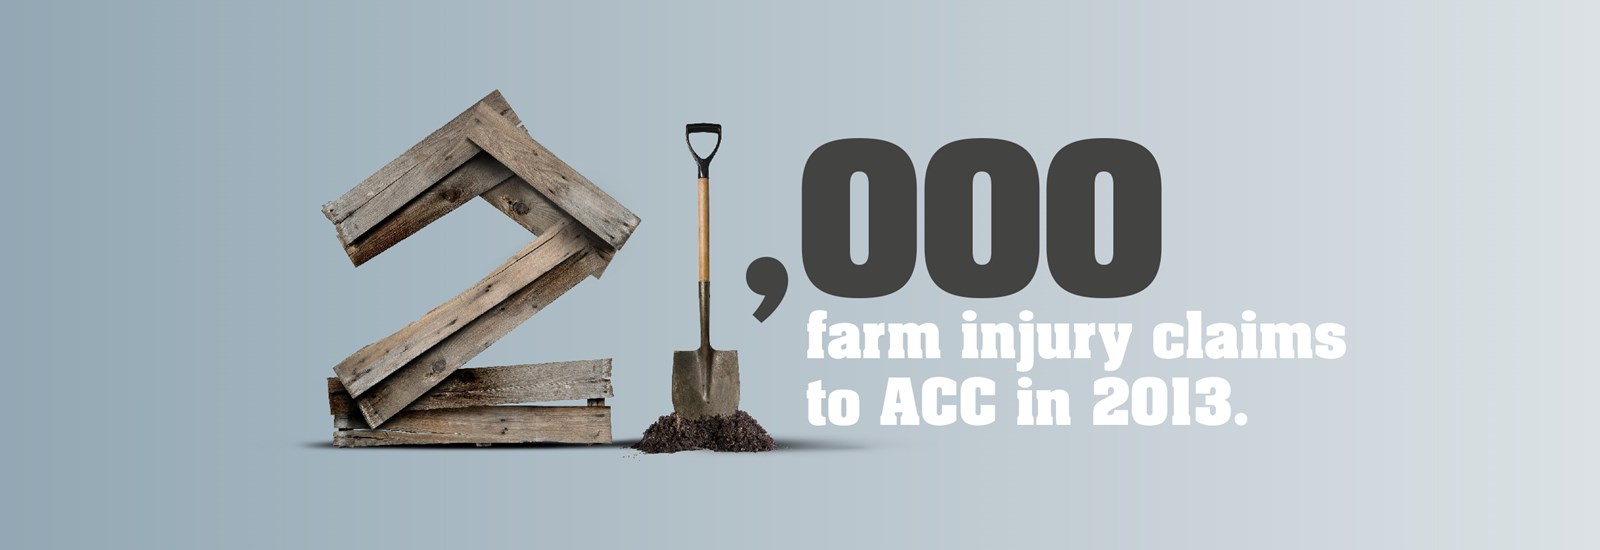 21,000 Farm injury claims to ACC in 2013